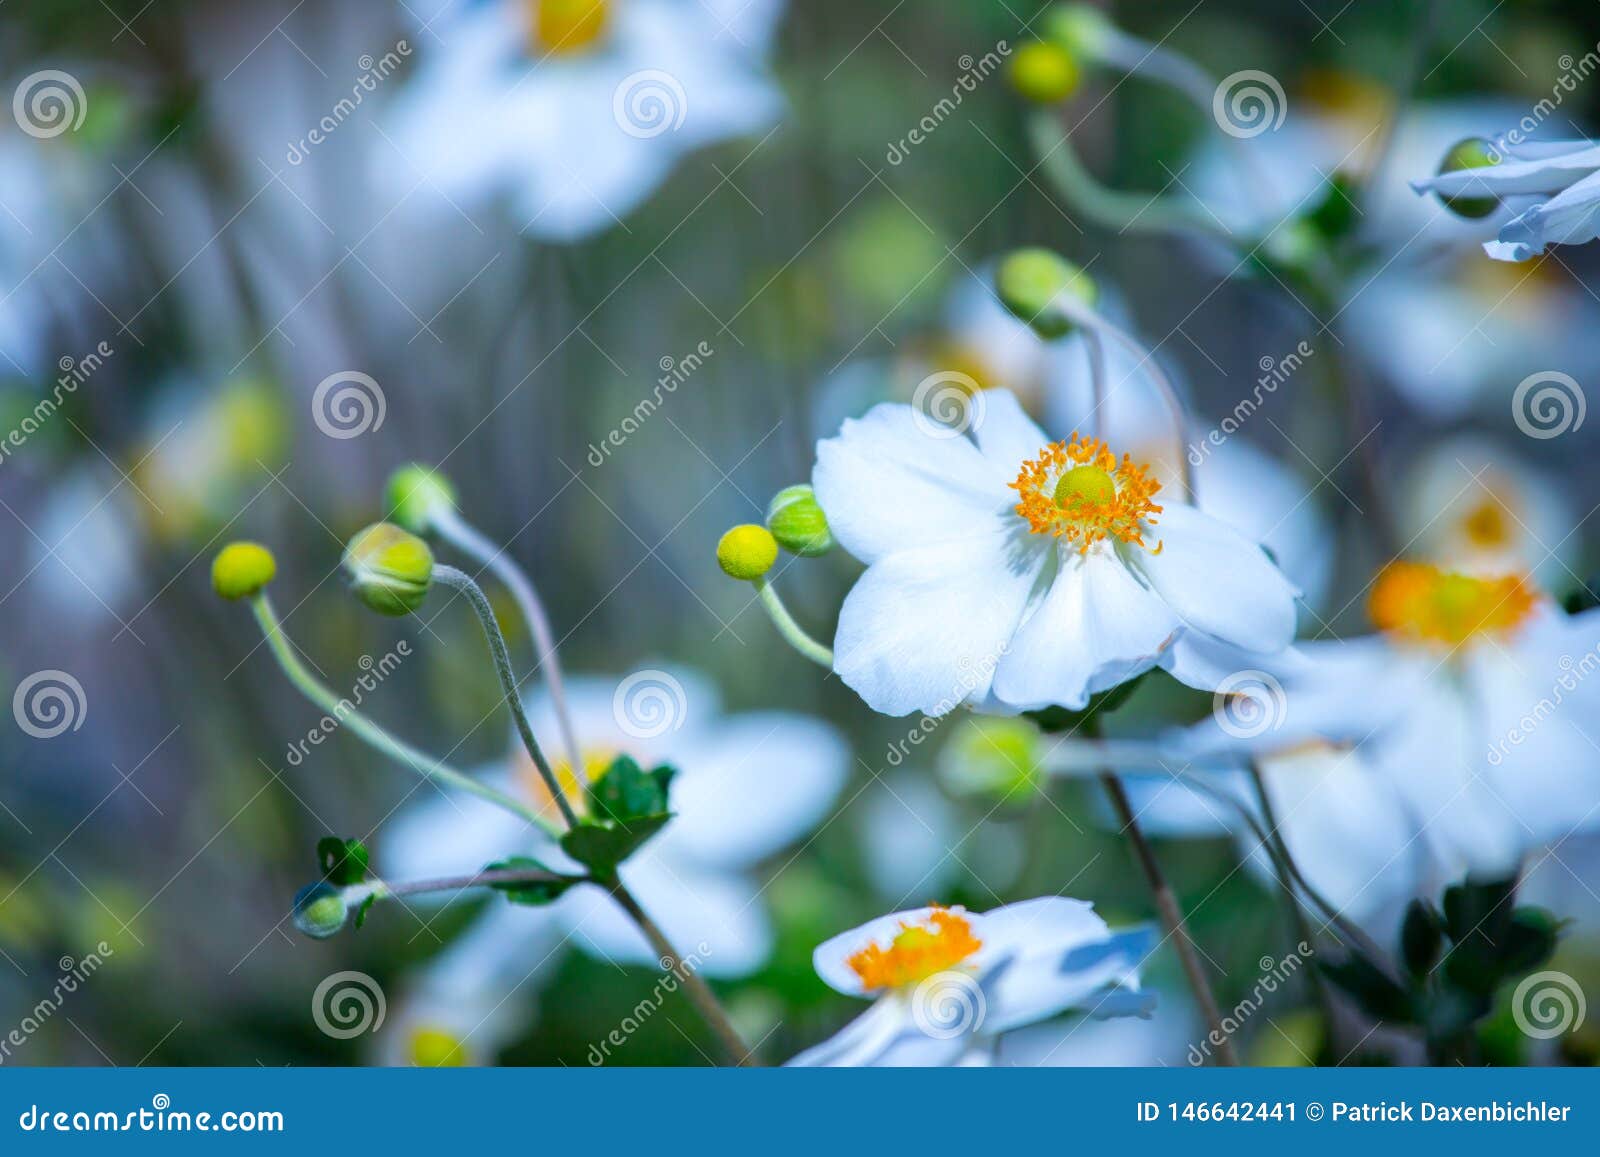 beautiful white orange flowers with blurry background in spring